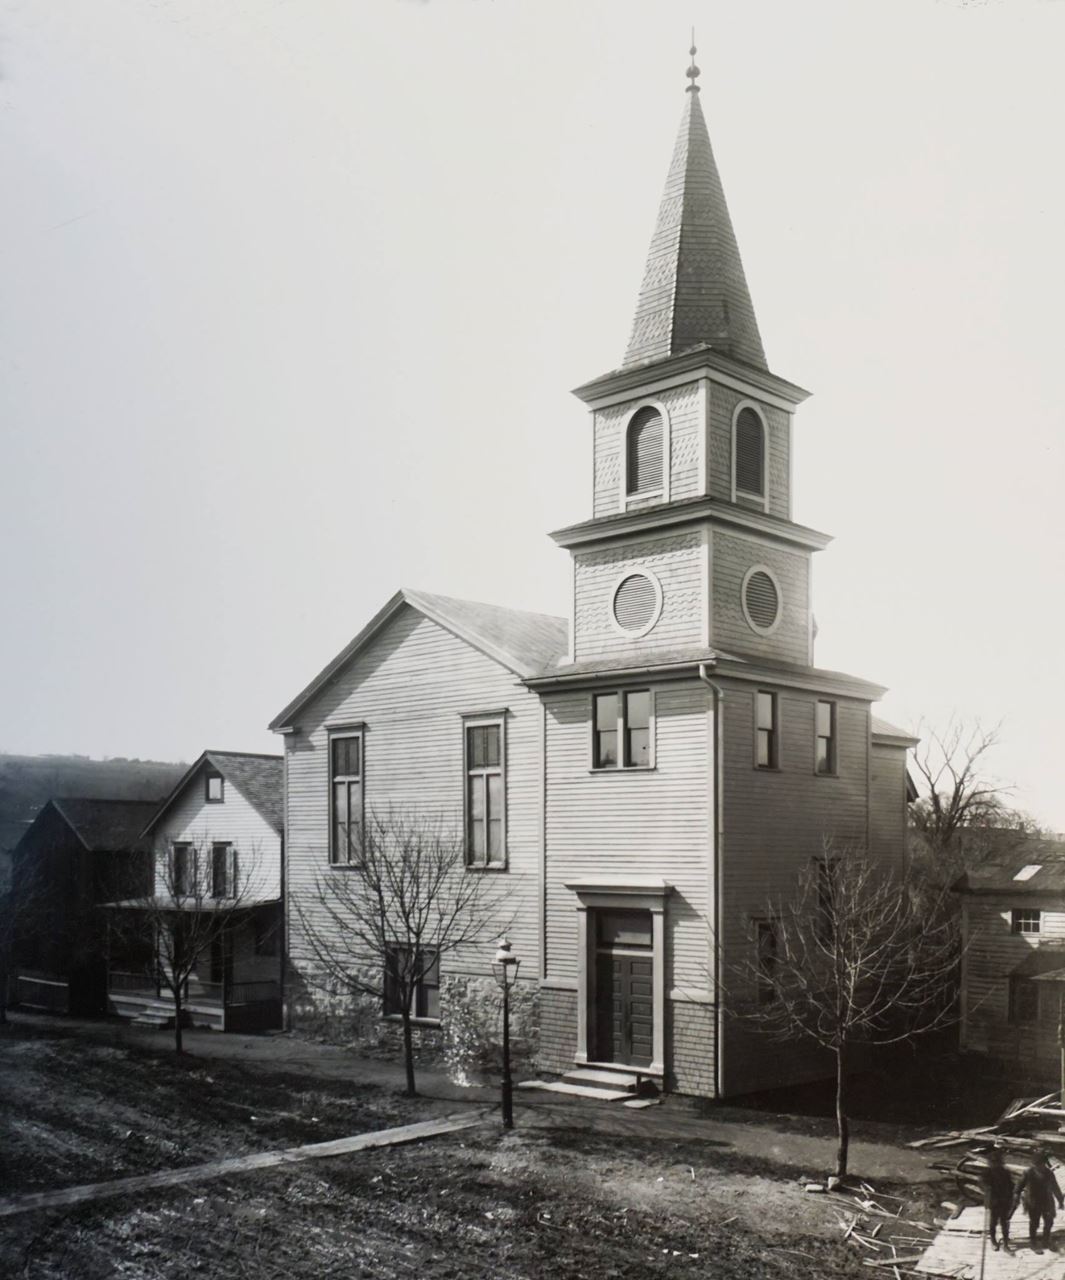 St. James AME Zion Church in 1836 - Ithaca, NY. General Photo Collection F1.127 